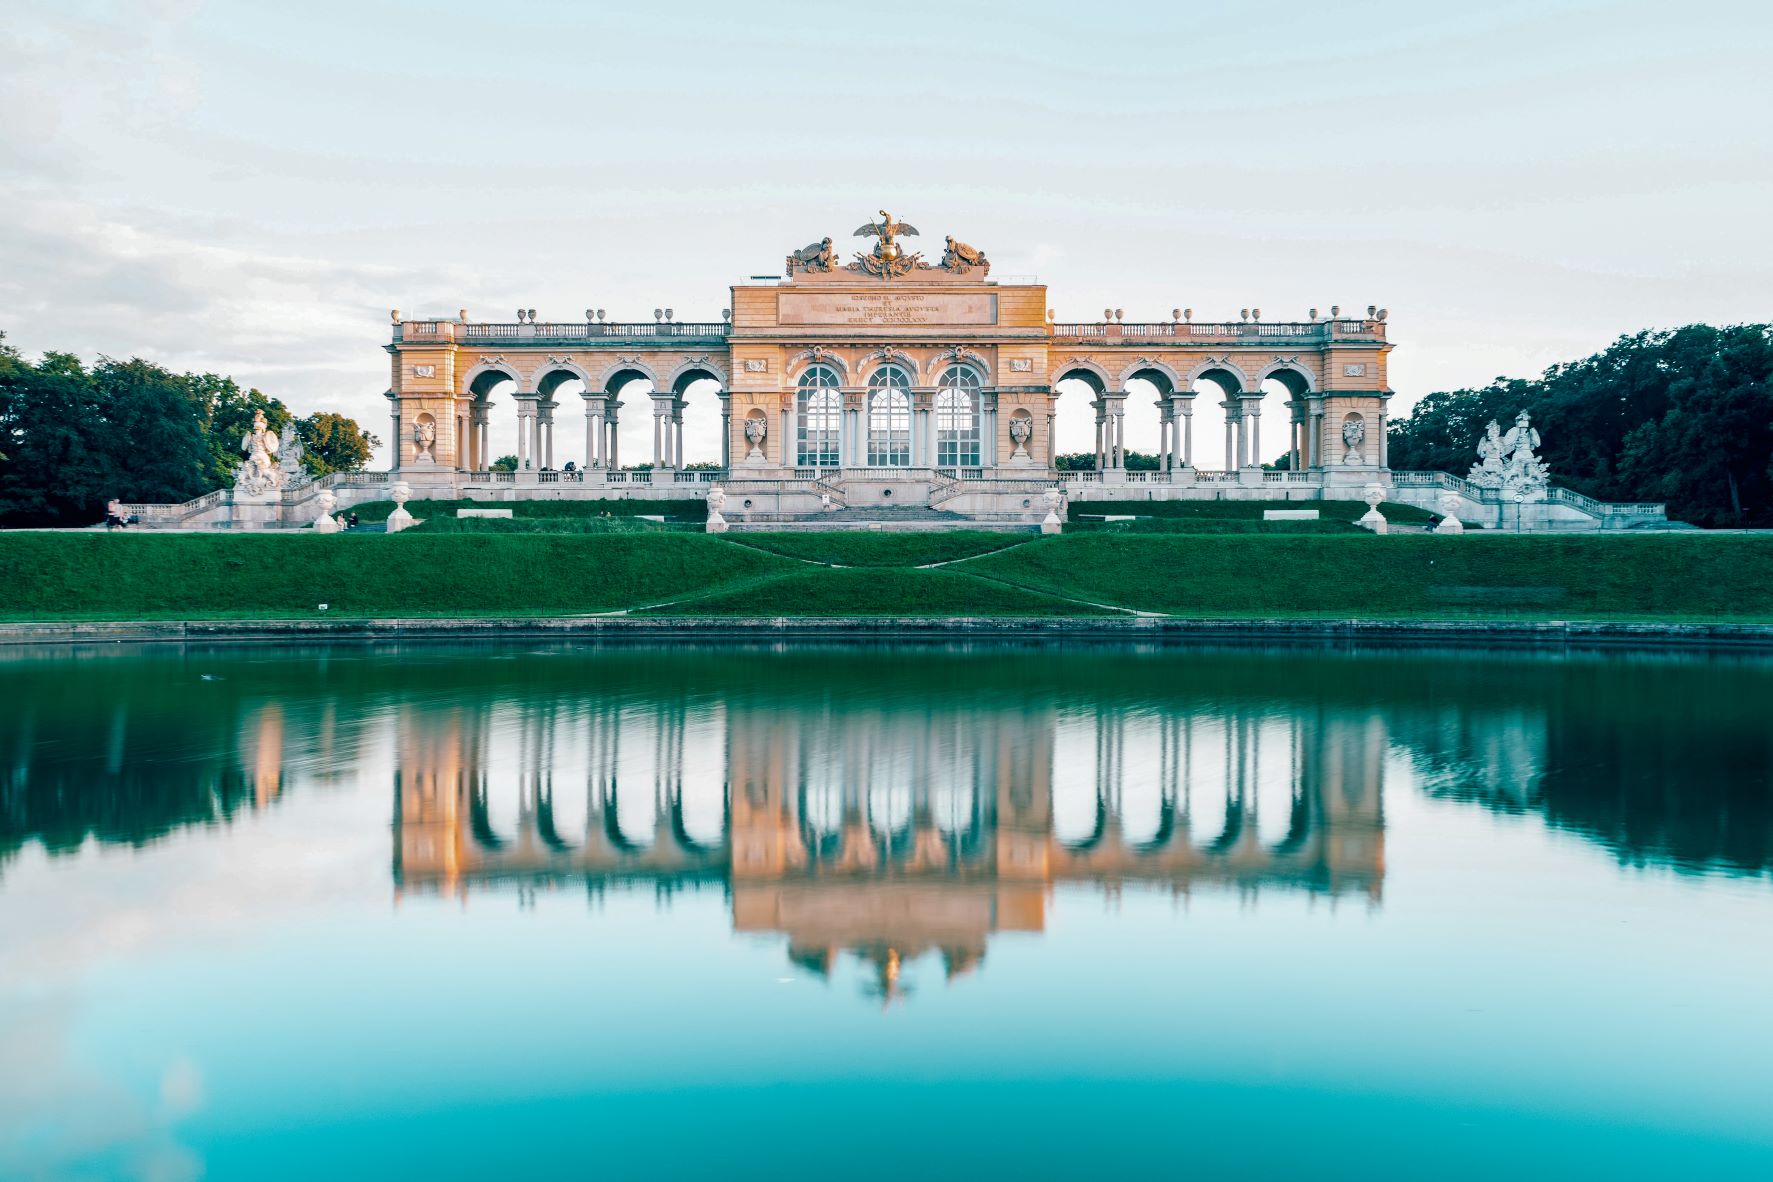 The Gloriette Pavilion features a stunning, blue pond and stylish architecture.